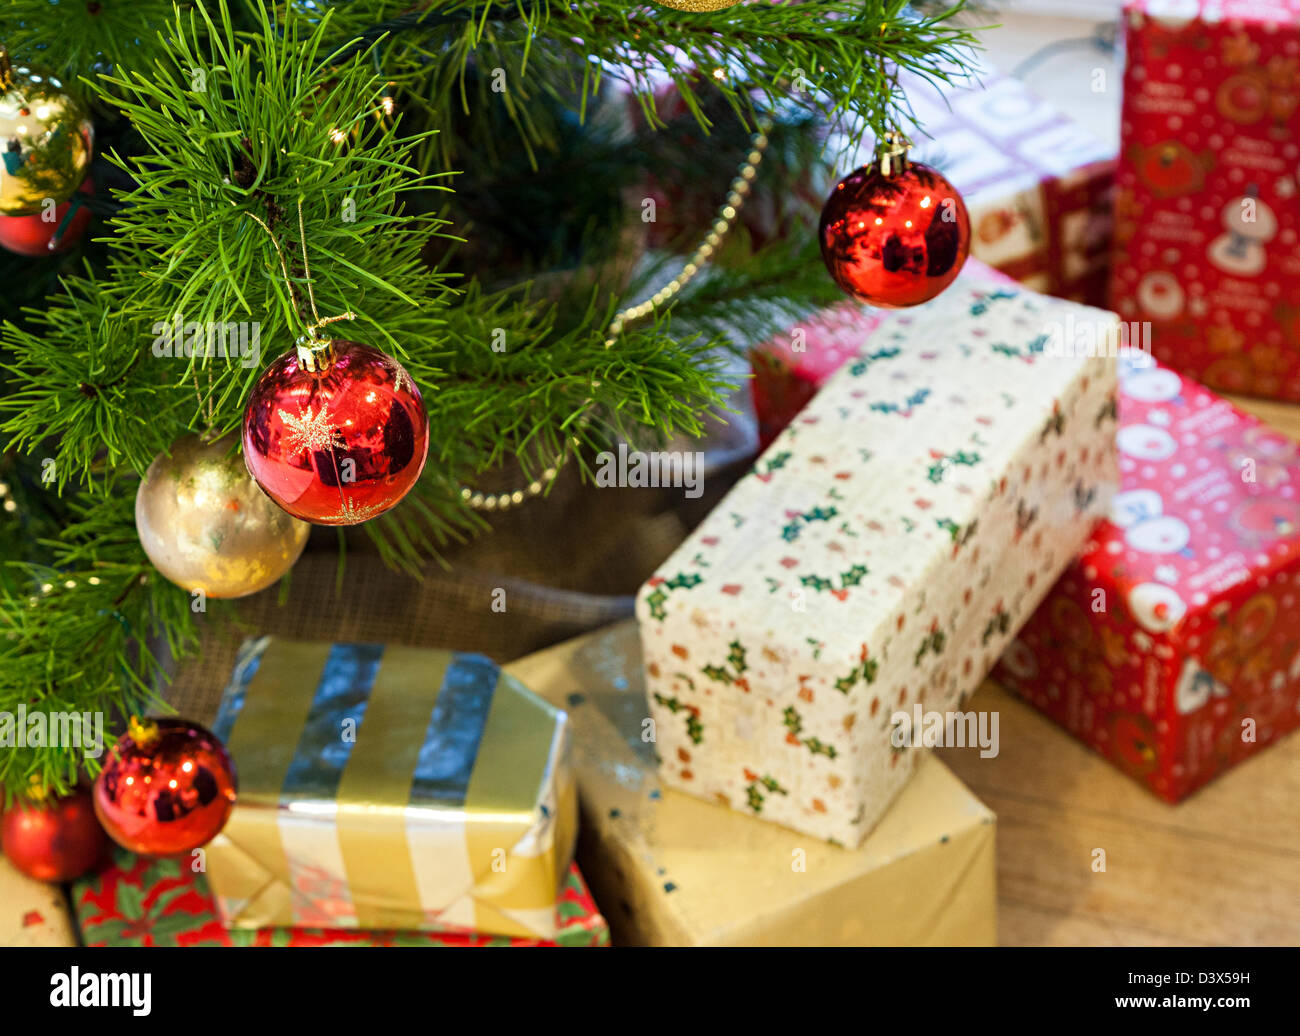 Christmas tree decorations and presents, UK Stock Photo